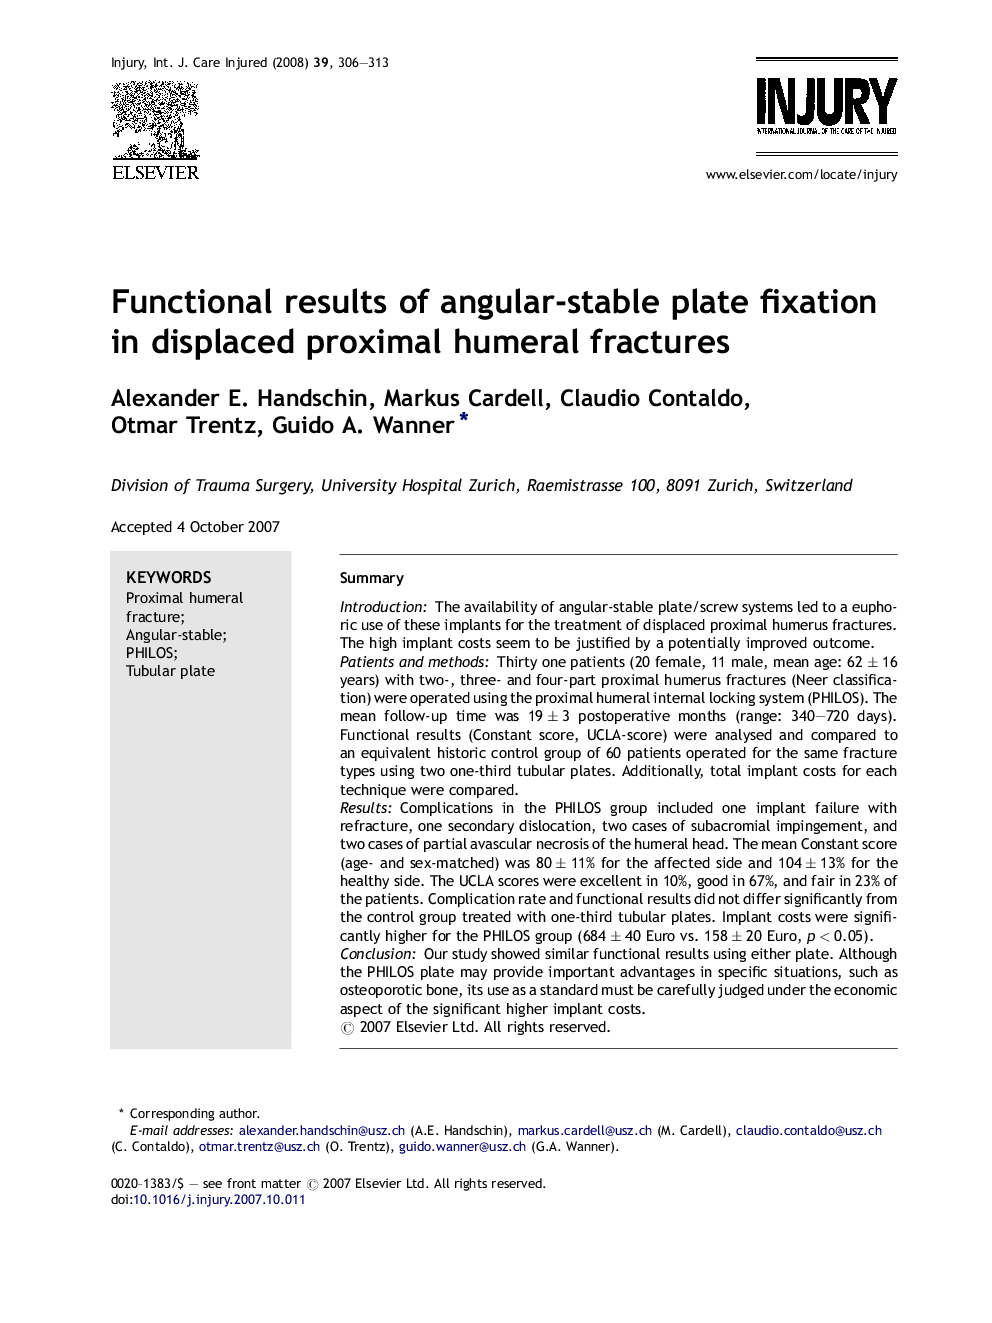 Functional results of angular-stable plate fixation in displaced proximal humeral fractures